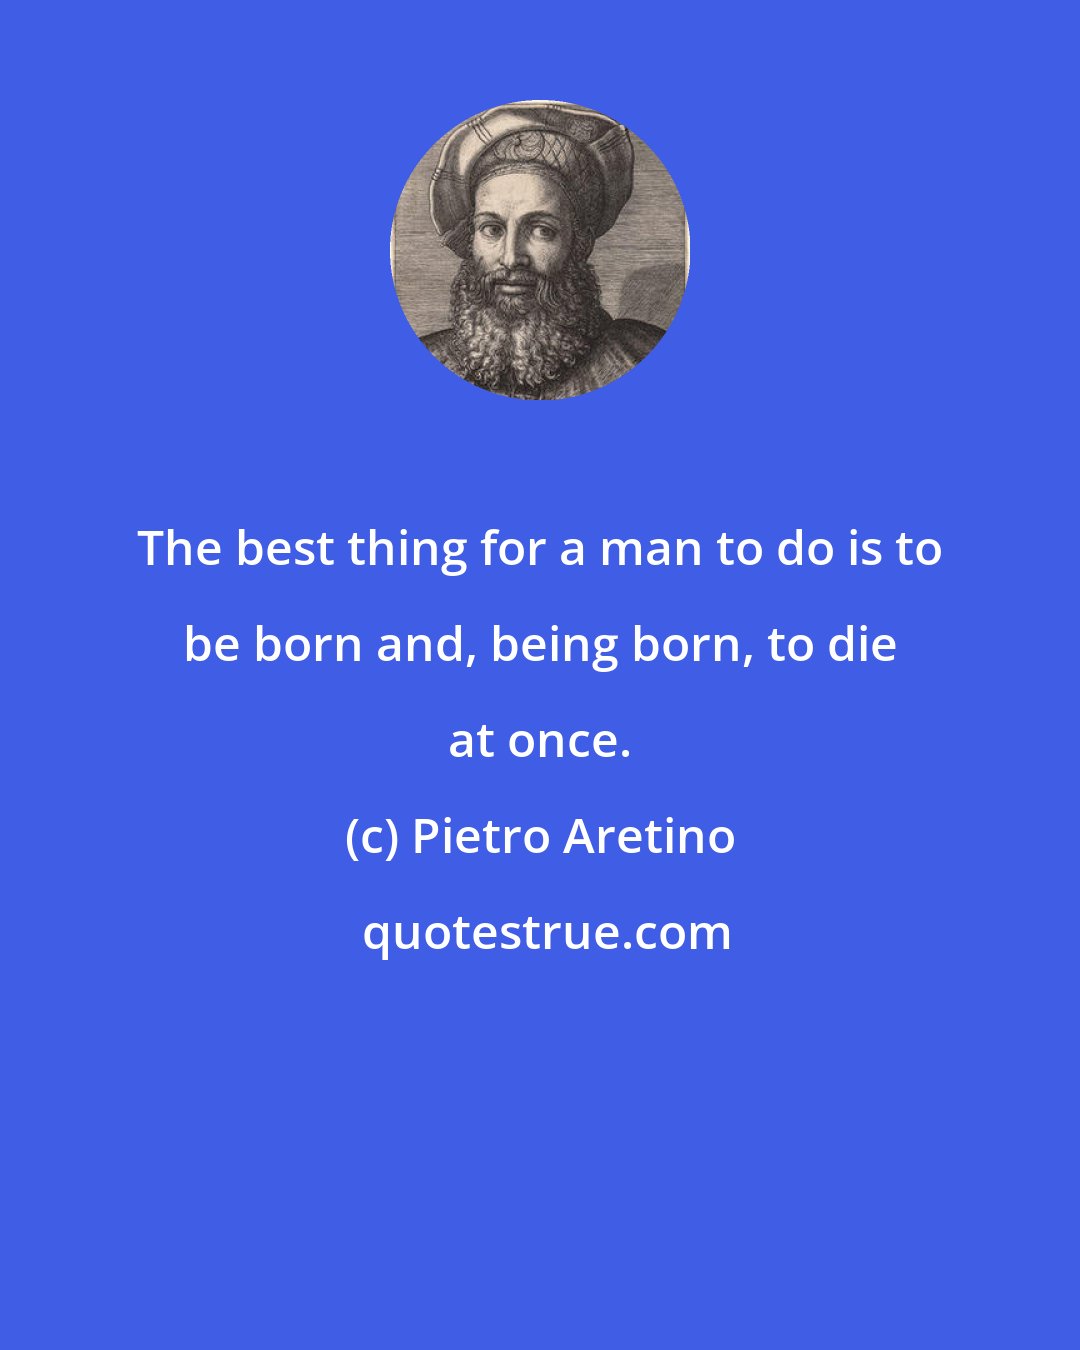 Pietro Aretino: The best thing for a man to do is to be born and, being born, to die at once.